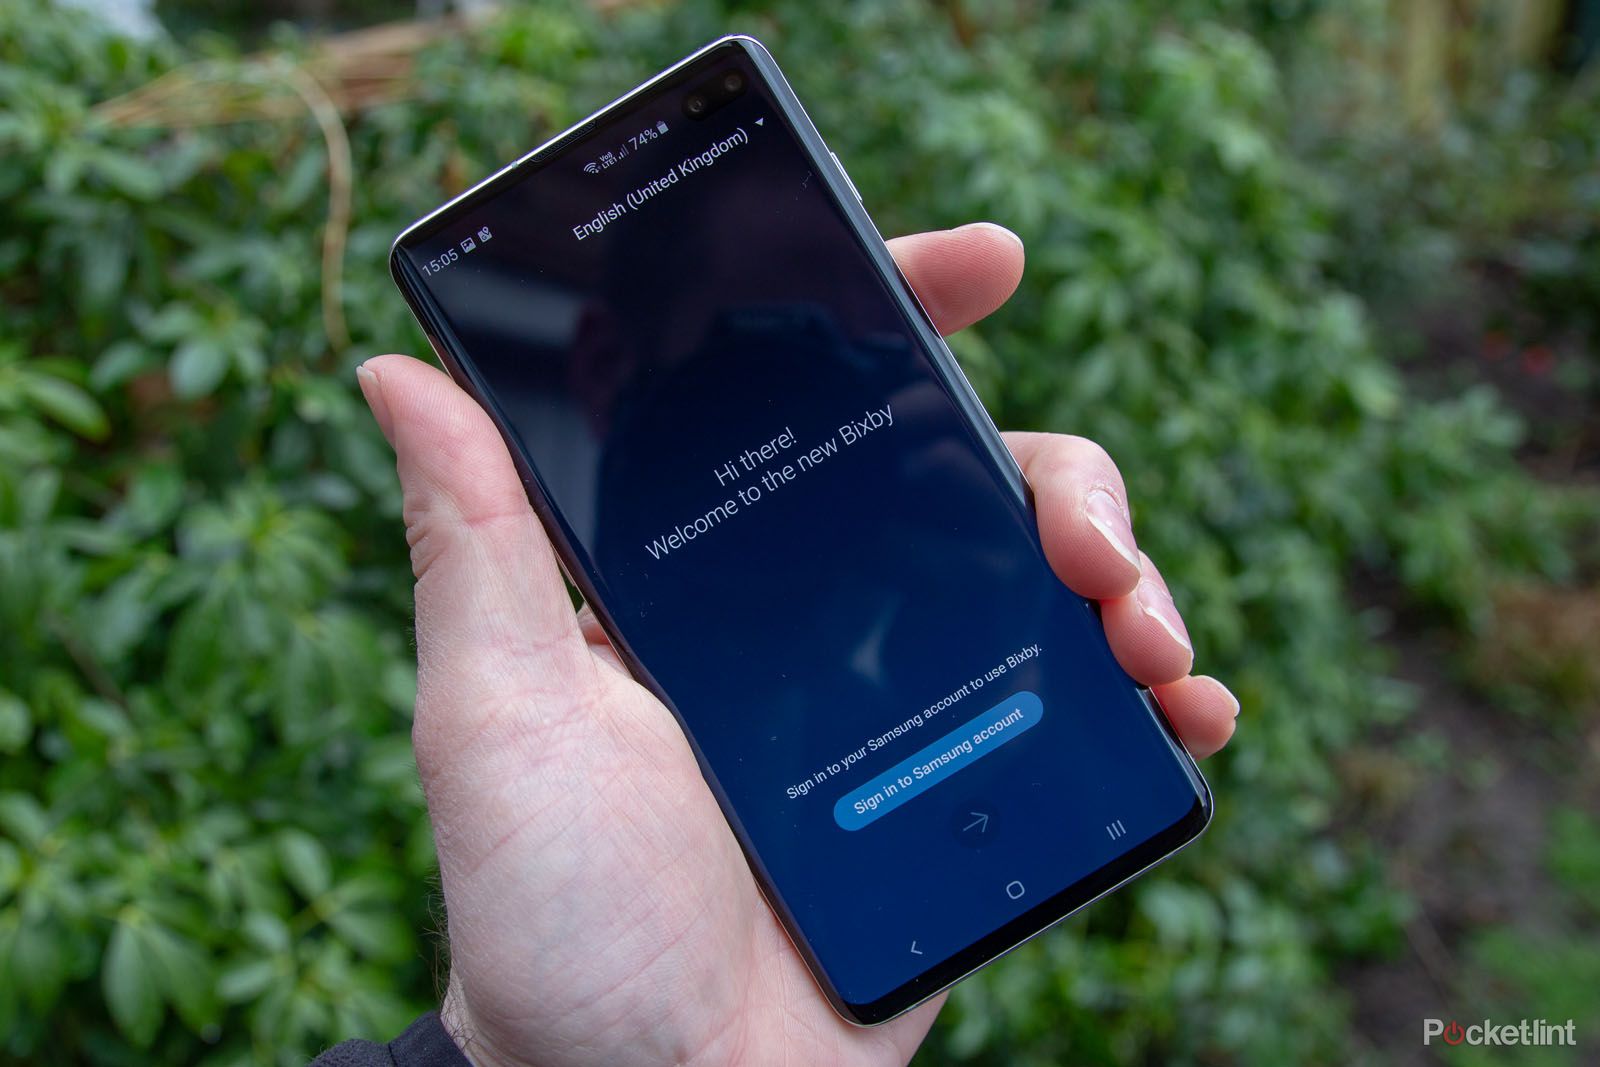 Samsung Galaxy S10 Bixby button remap function actually does have a nasty surprise image 1